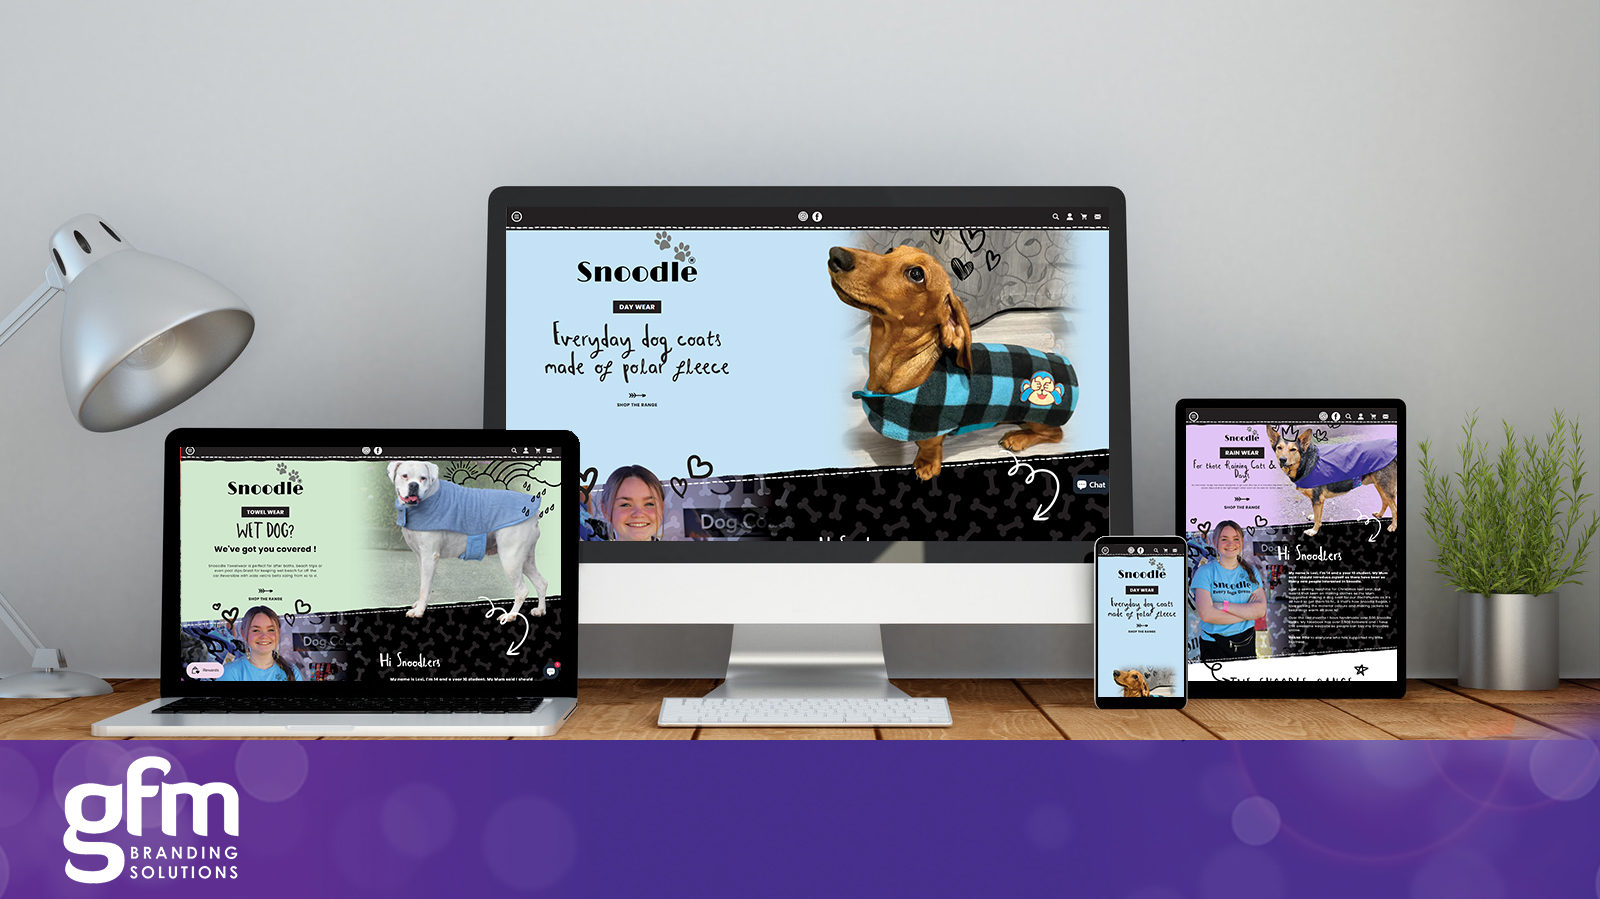 Snoodle fully responsive website design on multiple screens